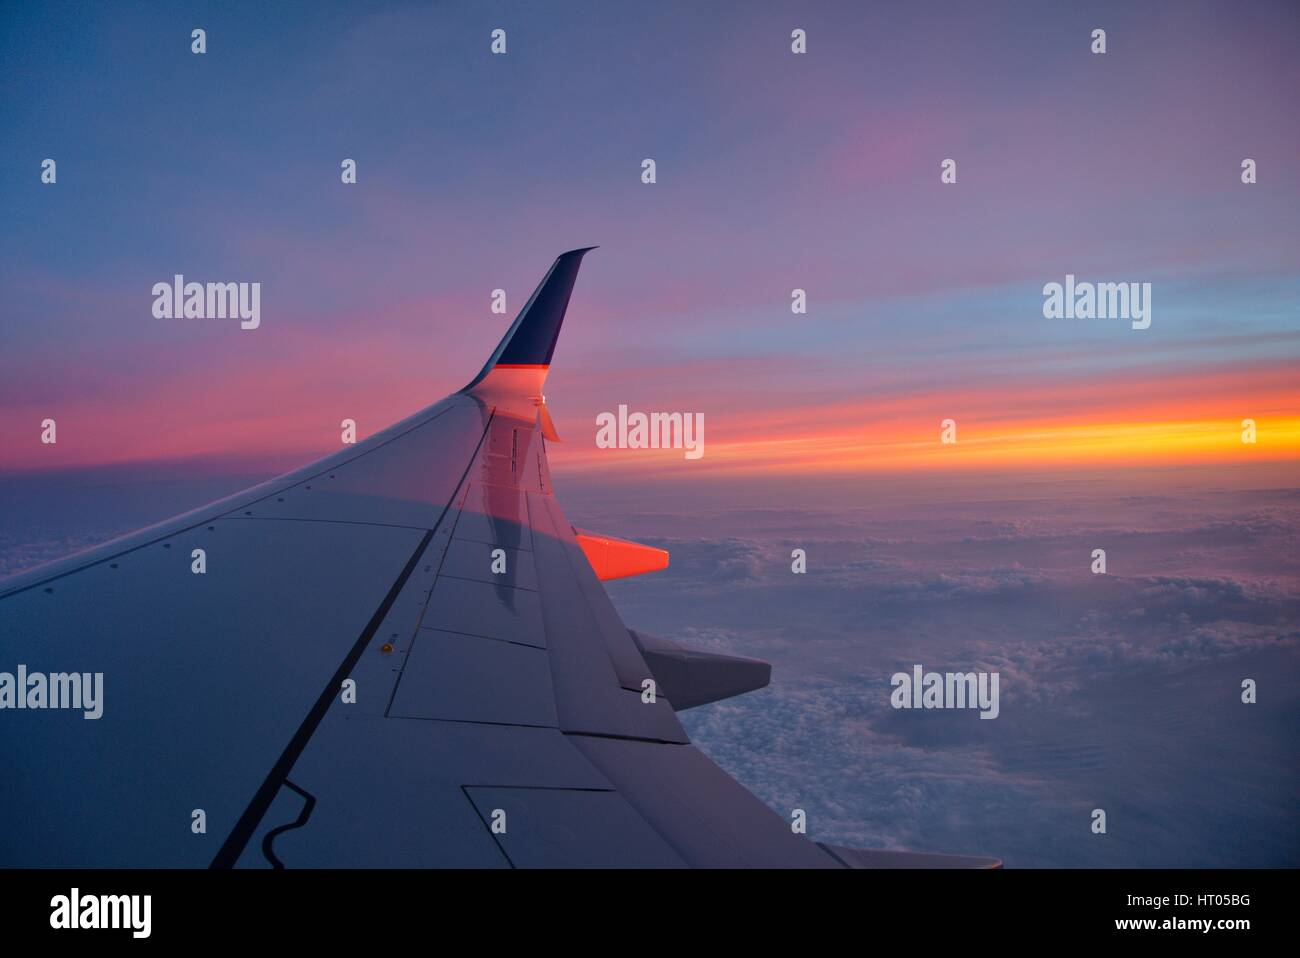 A rare crystal-clear view from the window of a passenger plane. Stock Photo